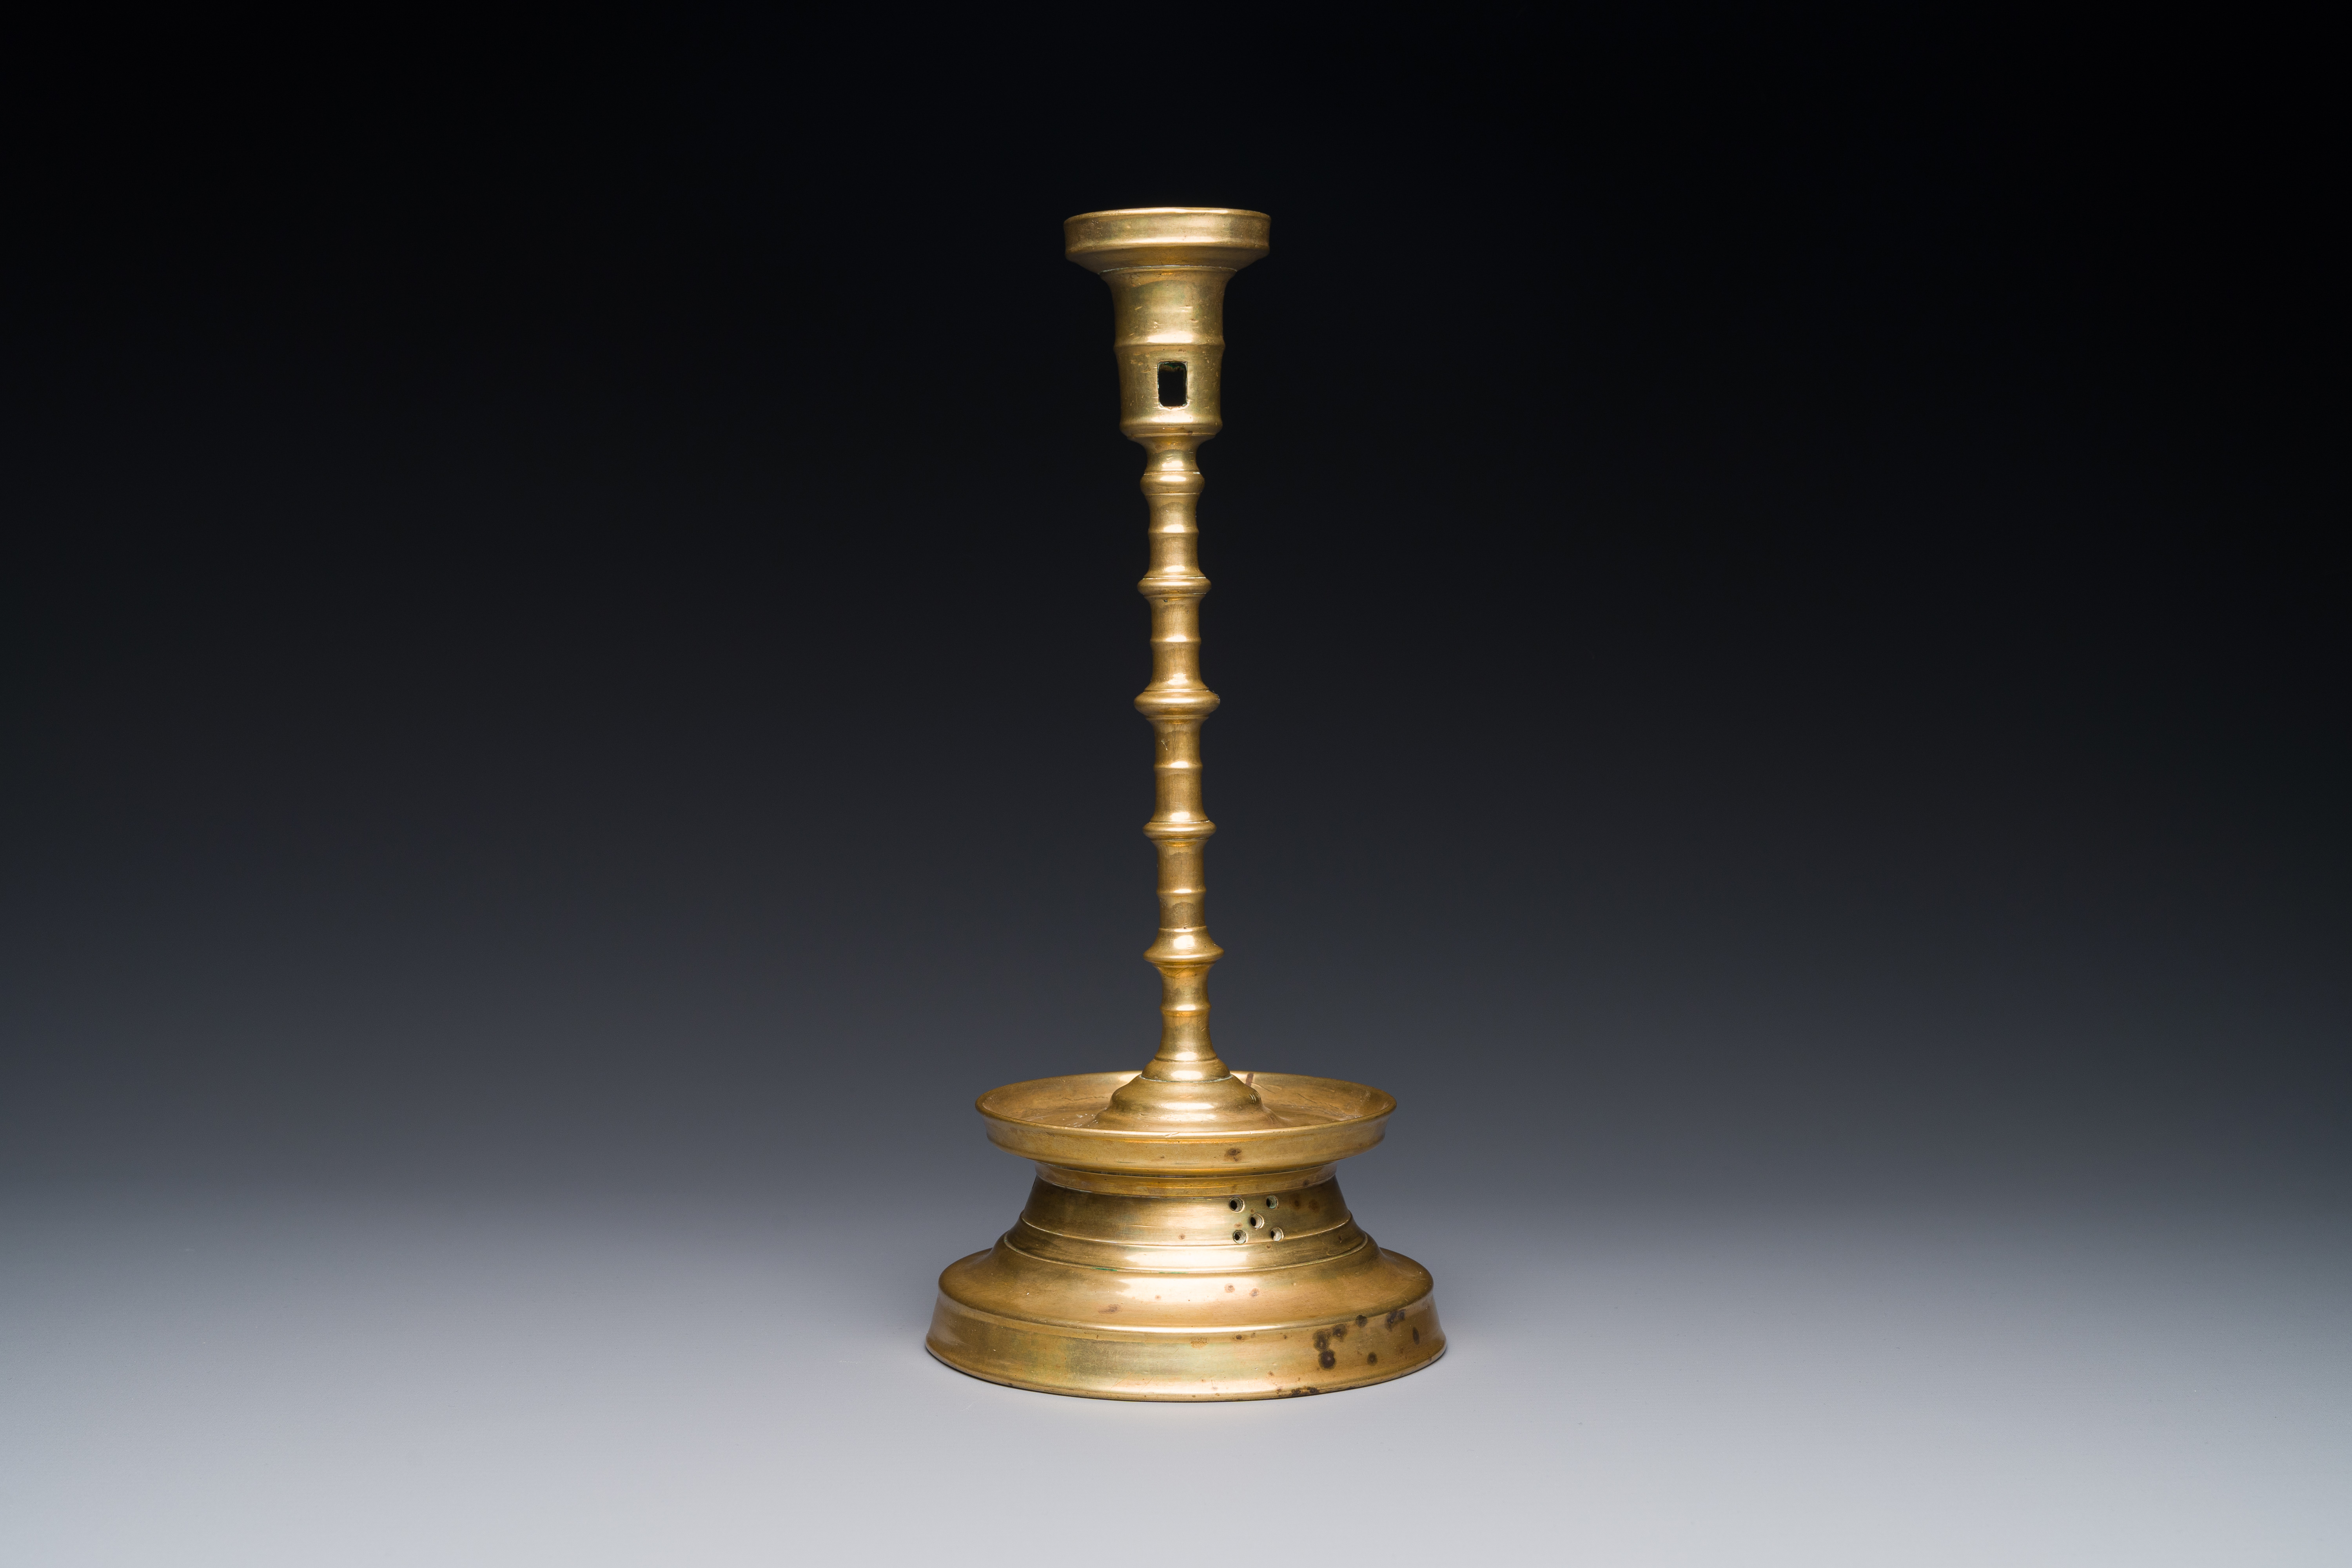 A knotted bronze candlestick, Southern Netherlands, probably 16th C. - Image 3 of 15